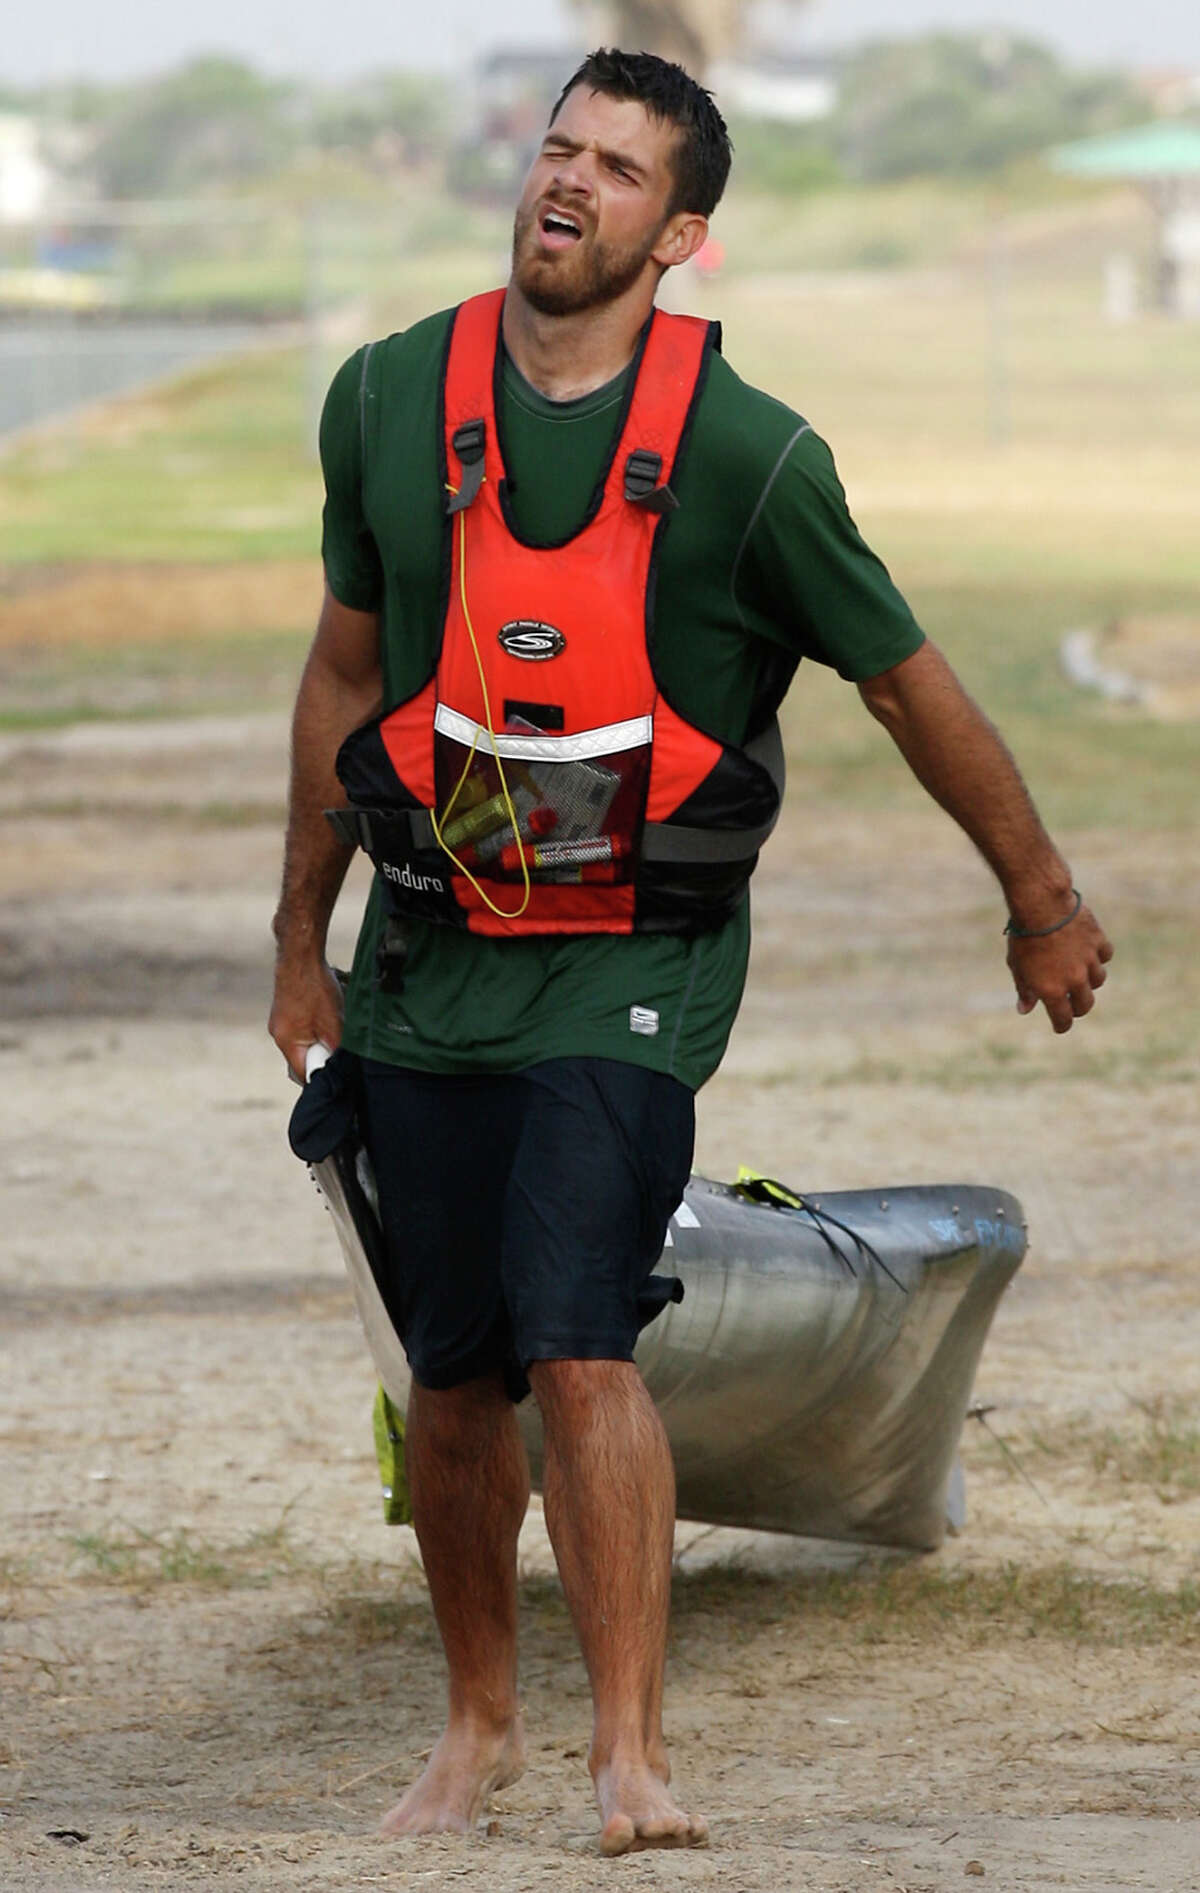 Andrew Condie drags his canoe the last quarter mile after getting out of the San Antonio Bay during the 2012 Texas Water Safari canoe race, Monday, June 11, 2012. Allowed by rules, Condie was able to finished in 12th place overall.